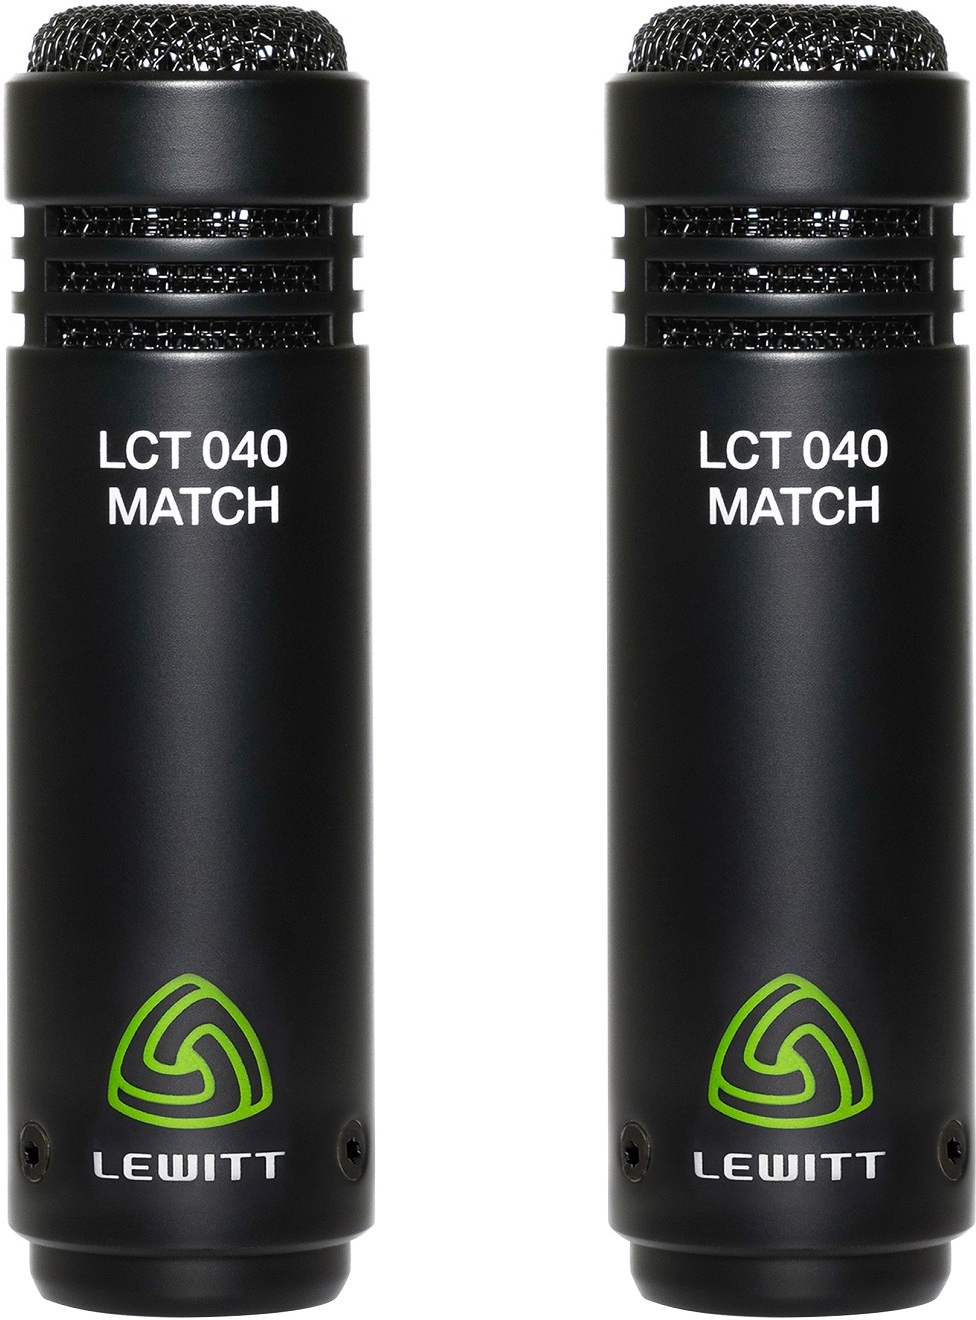 Lewitt Lct 040 Match Stereo Pair - Micro Statique Petite Membrane - Main picture